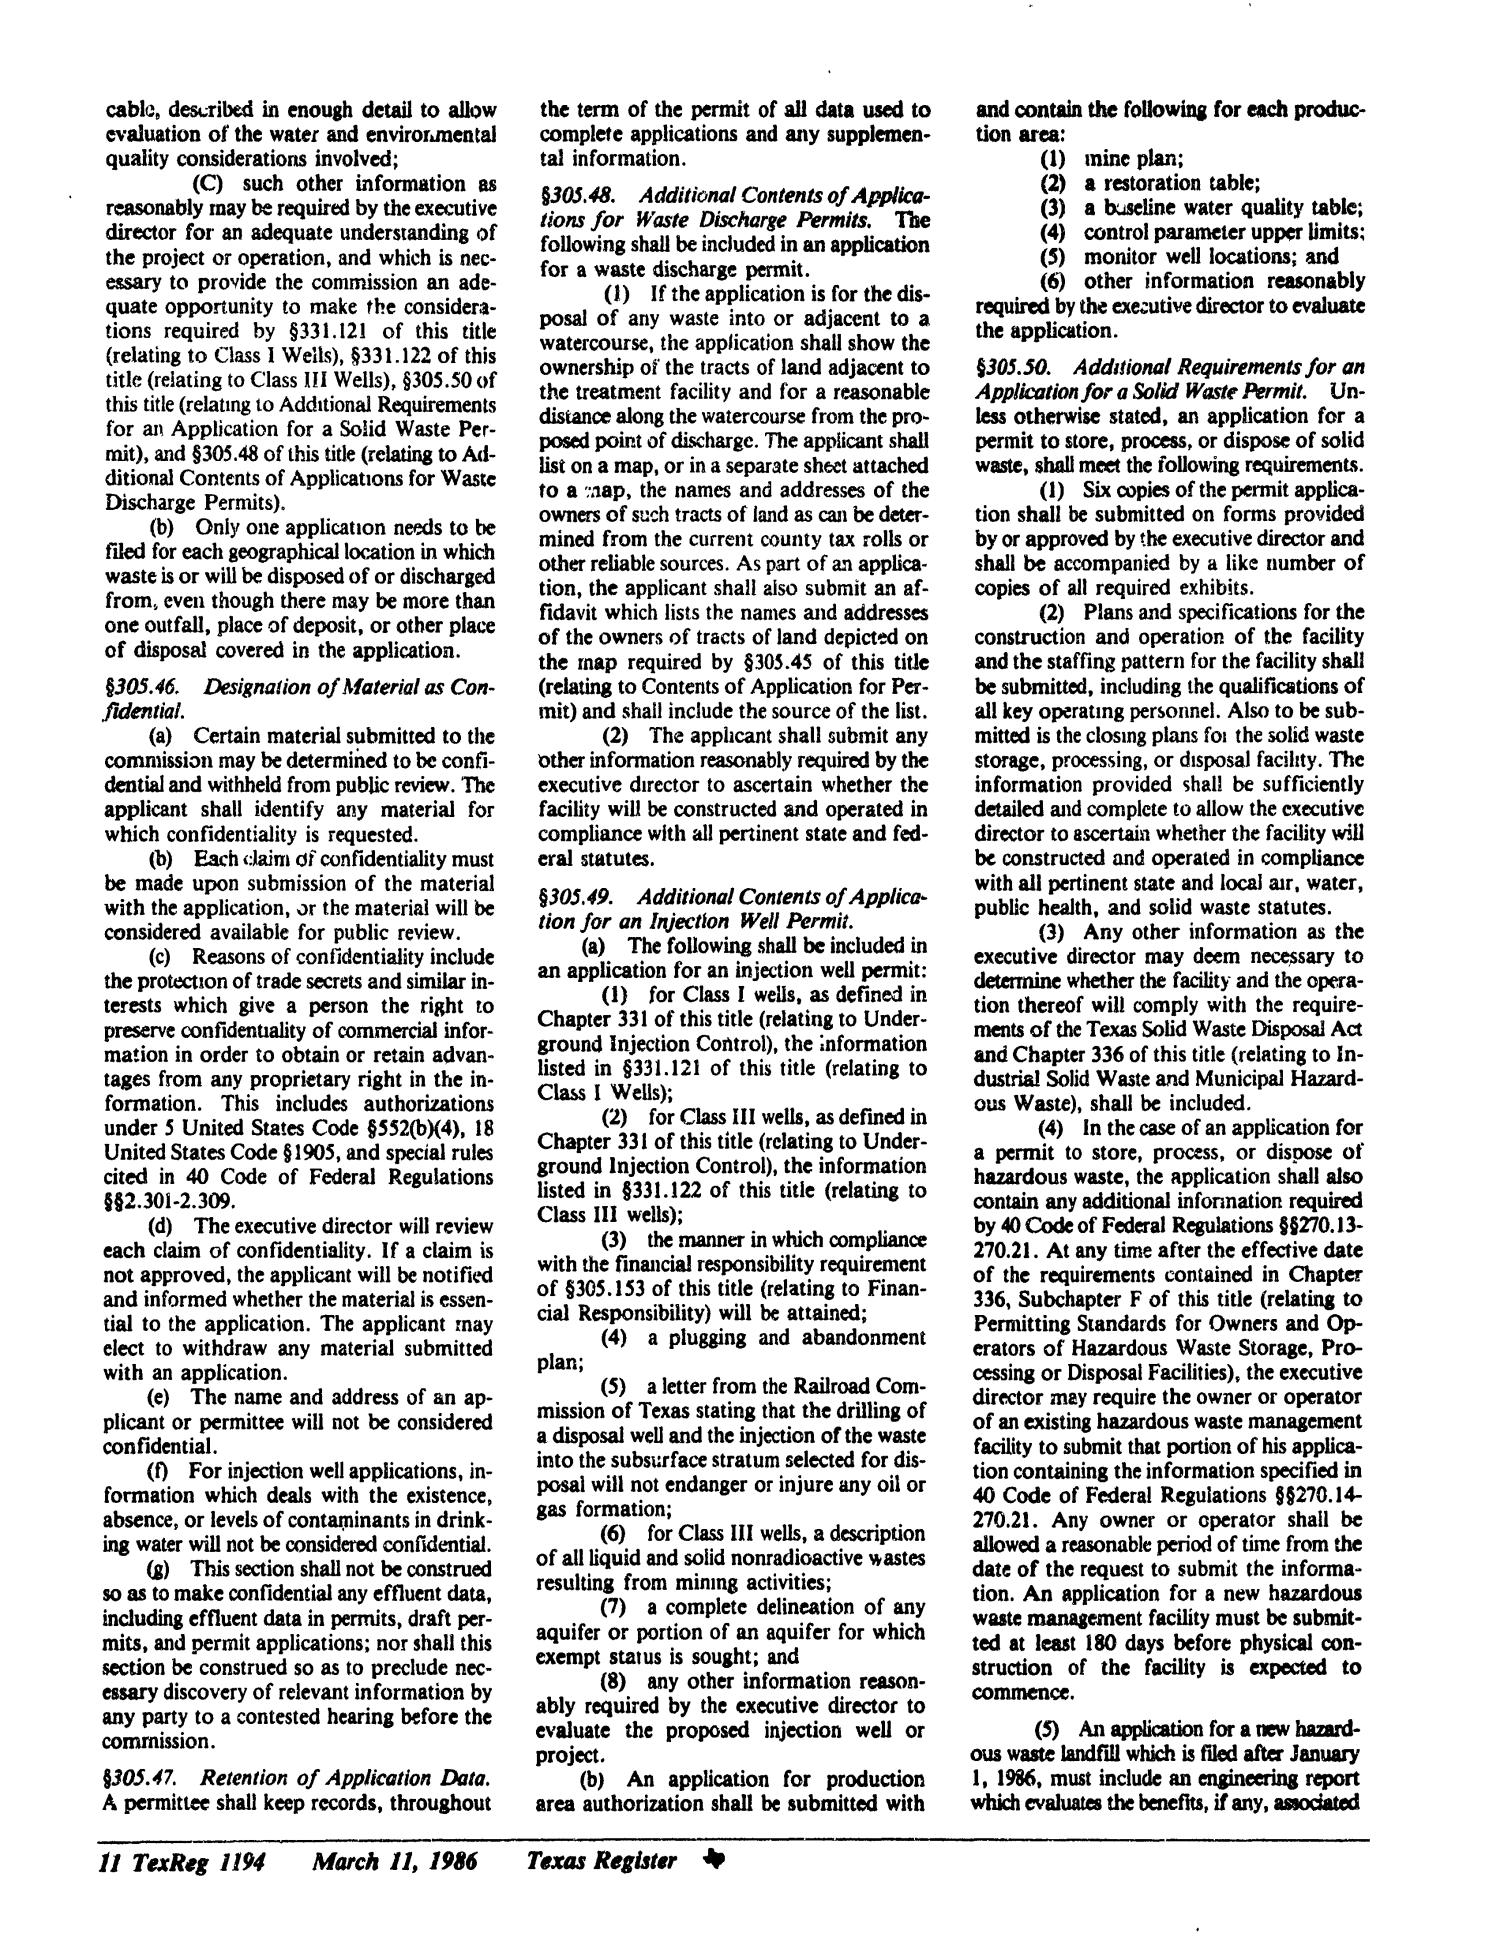 Texas Register, Volume 11, Number 19, Pages 1163-1244, March 11, 1986
                                                
                                                    1194
                                                